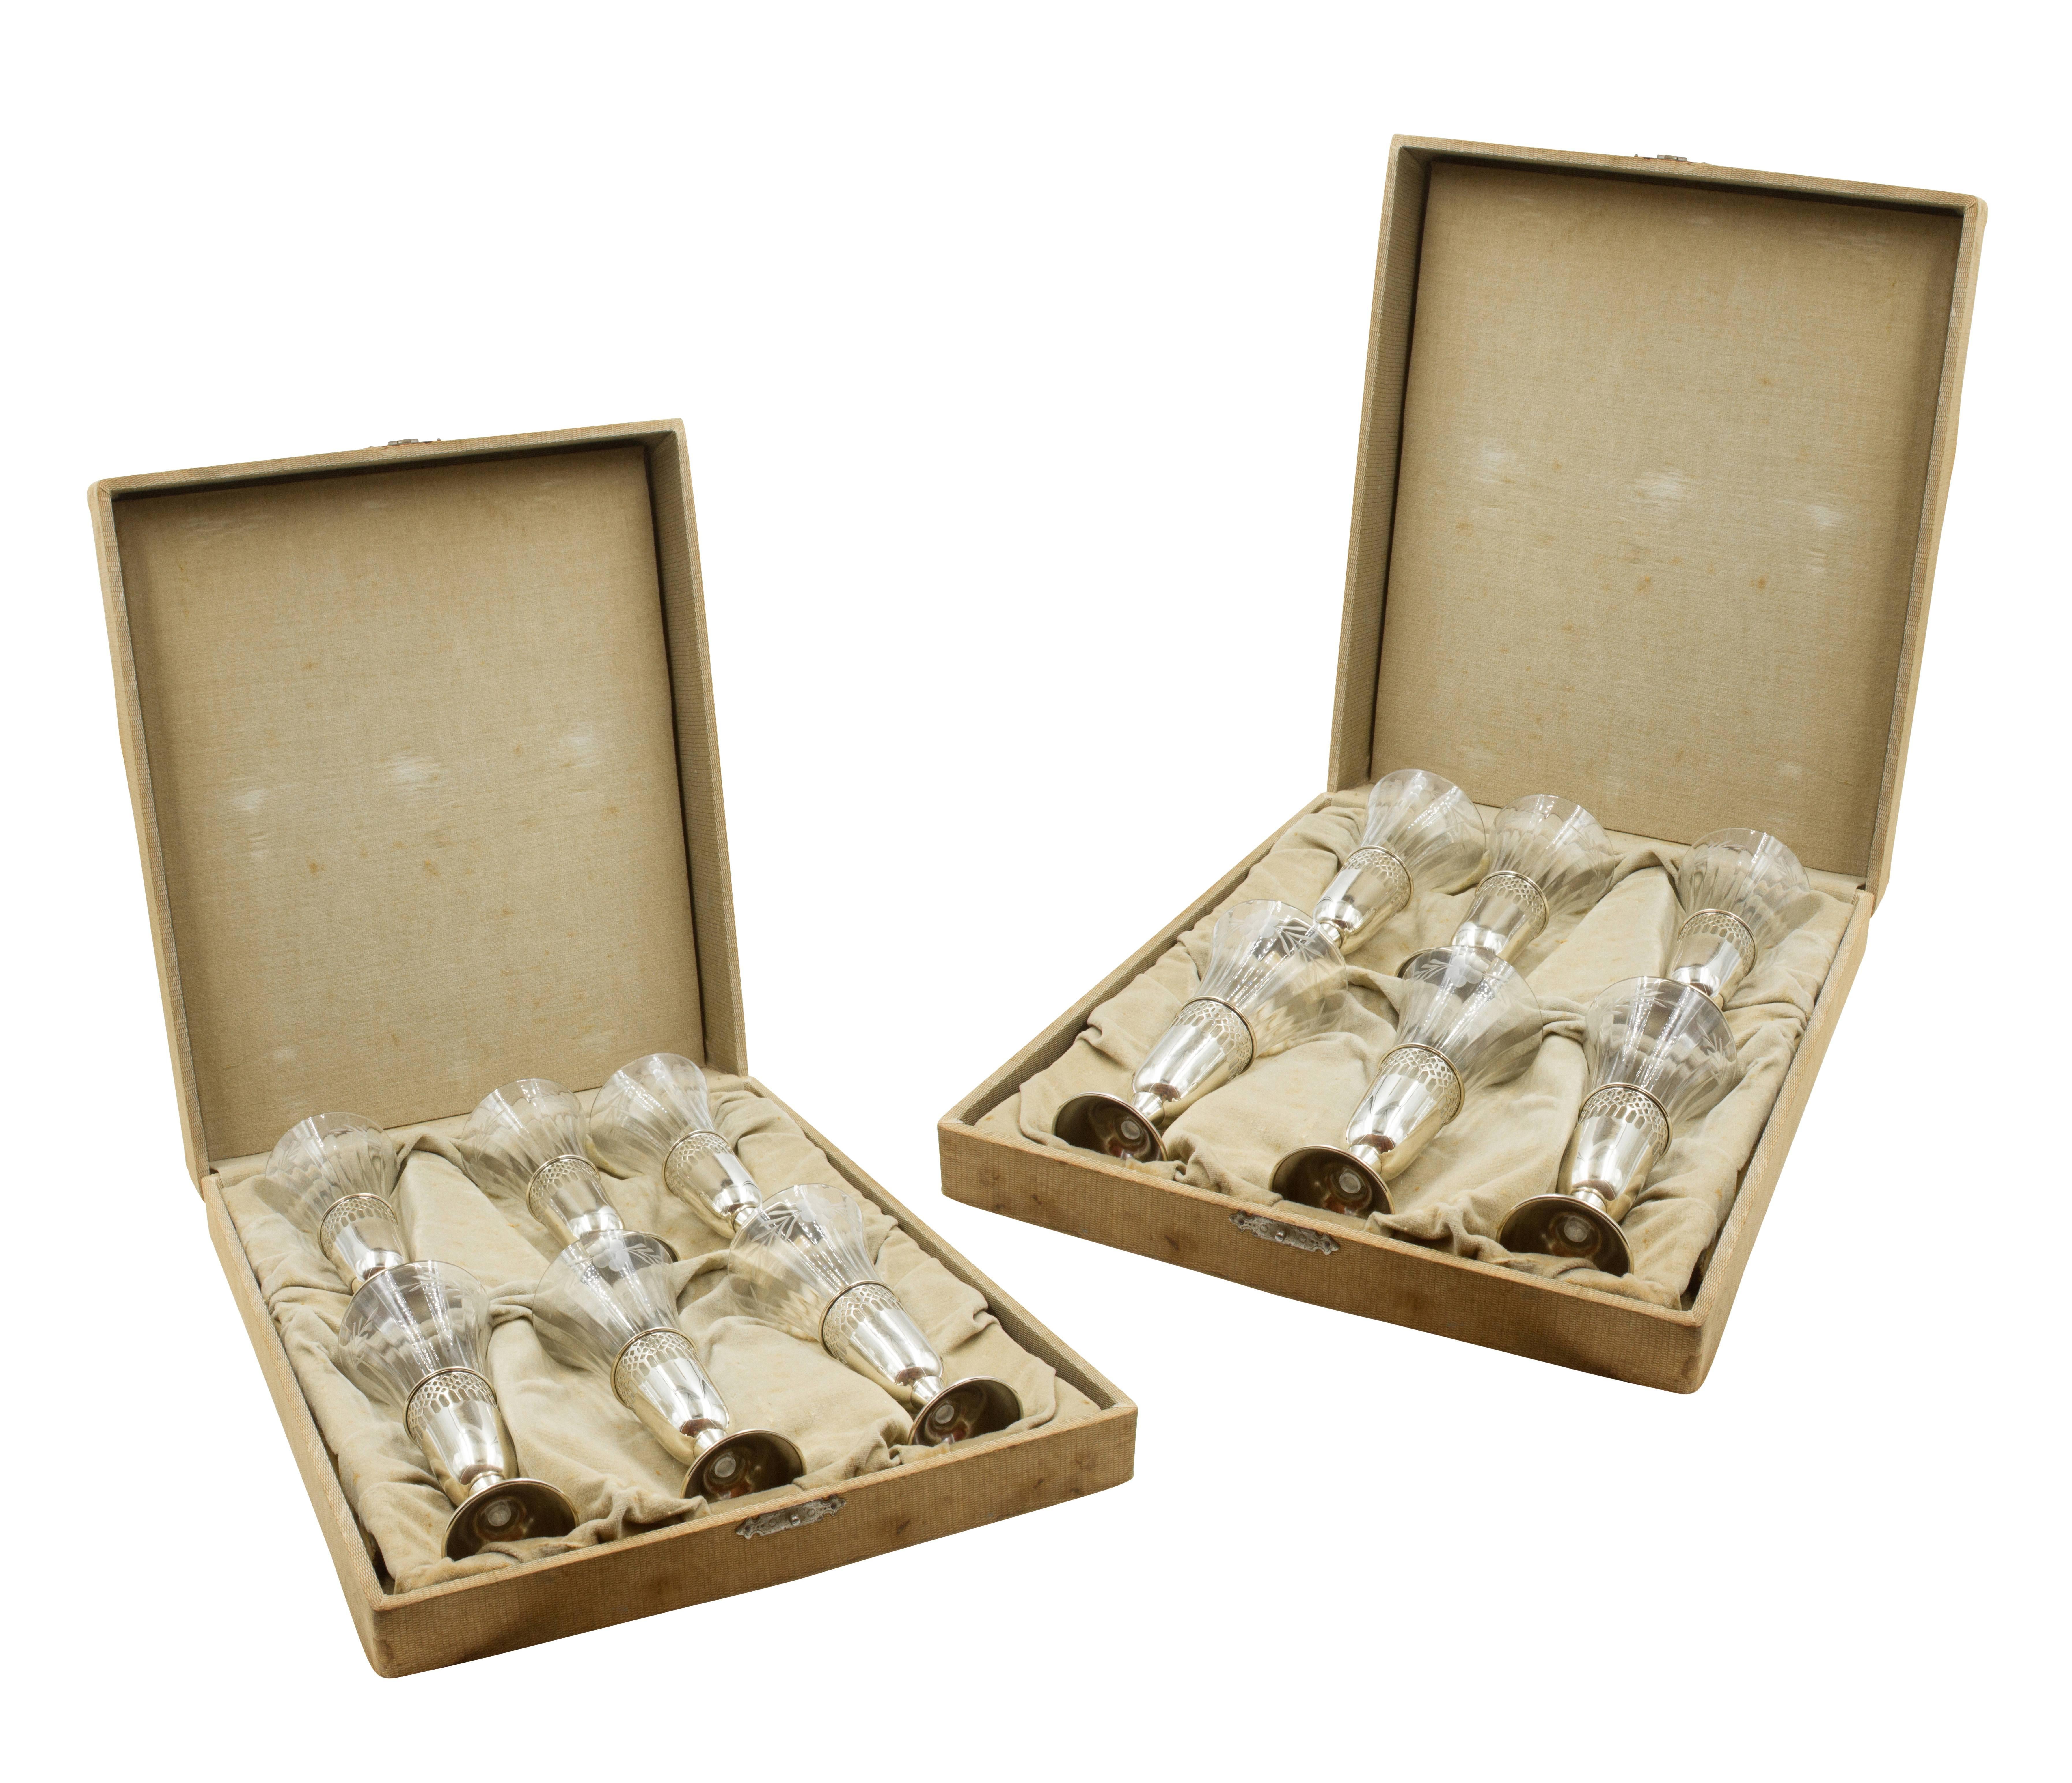 A complete set of 12 is so hard to come by, but here you go: twelve perfect crystal and sterling Champagne/liqueur cordials. Original crystal liners fit into the sterling holders. Delicate etching encircles the entire top of the crystal while an